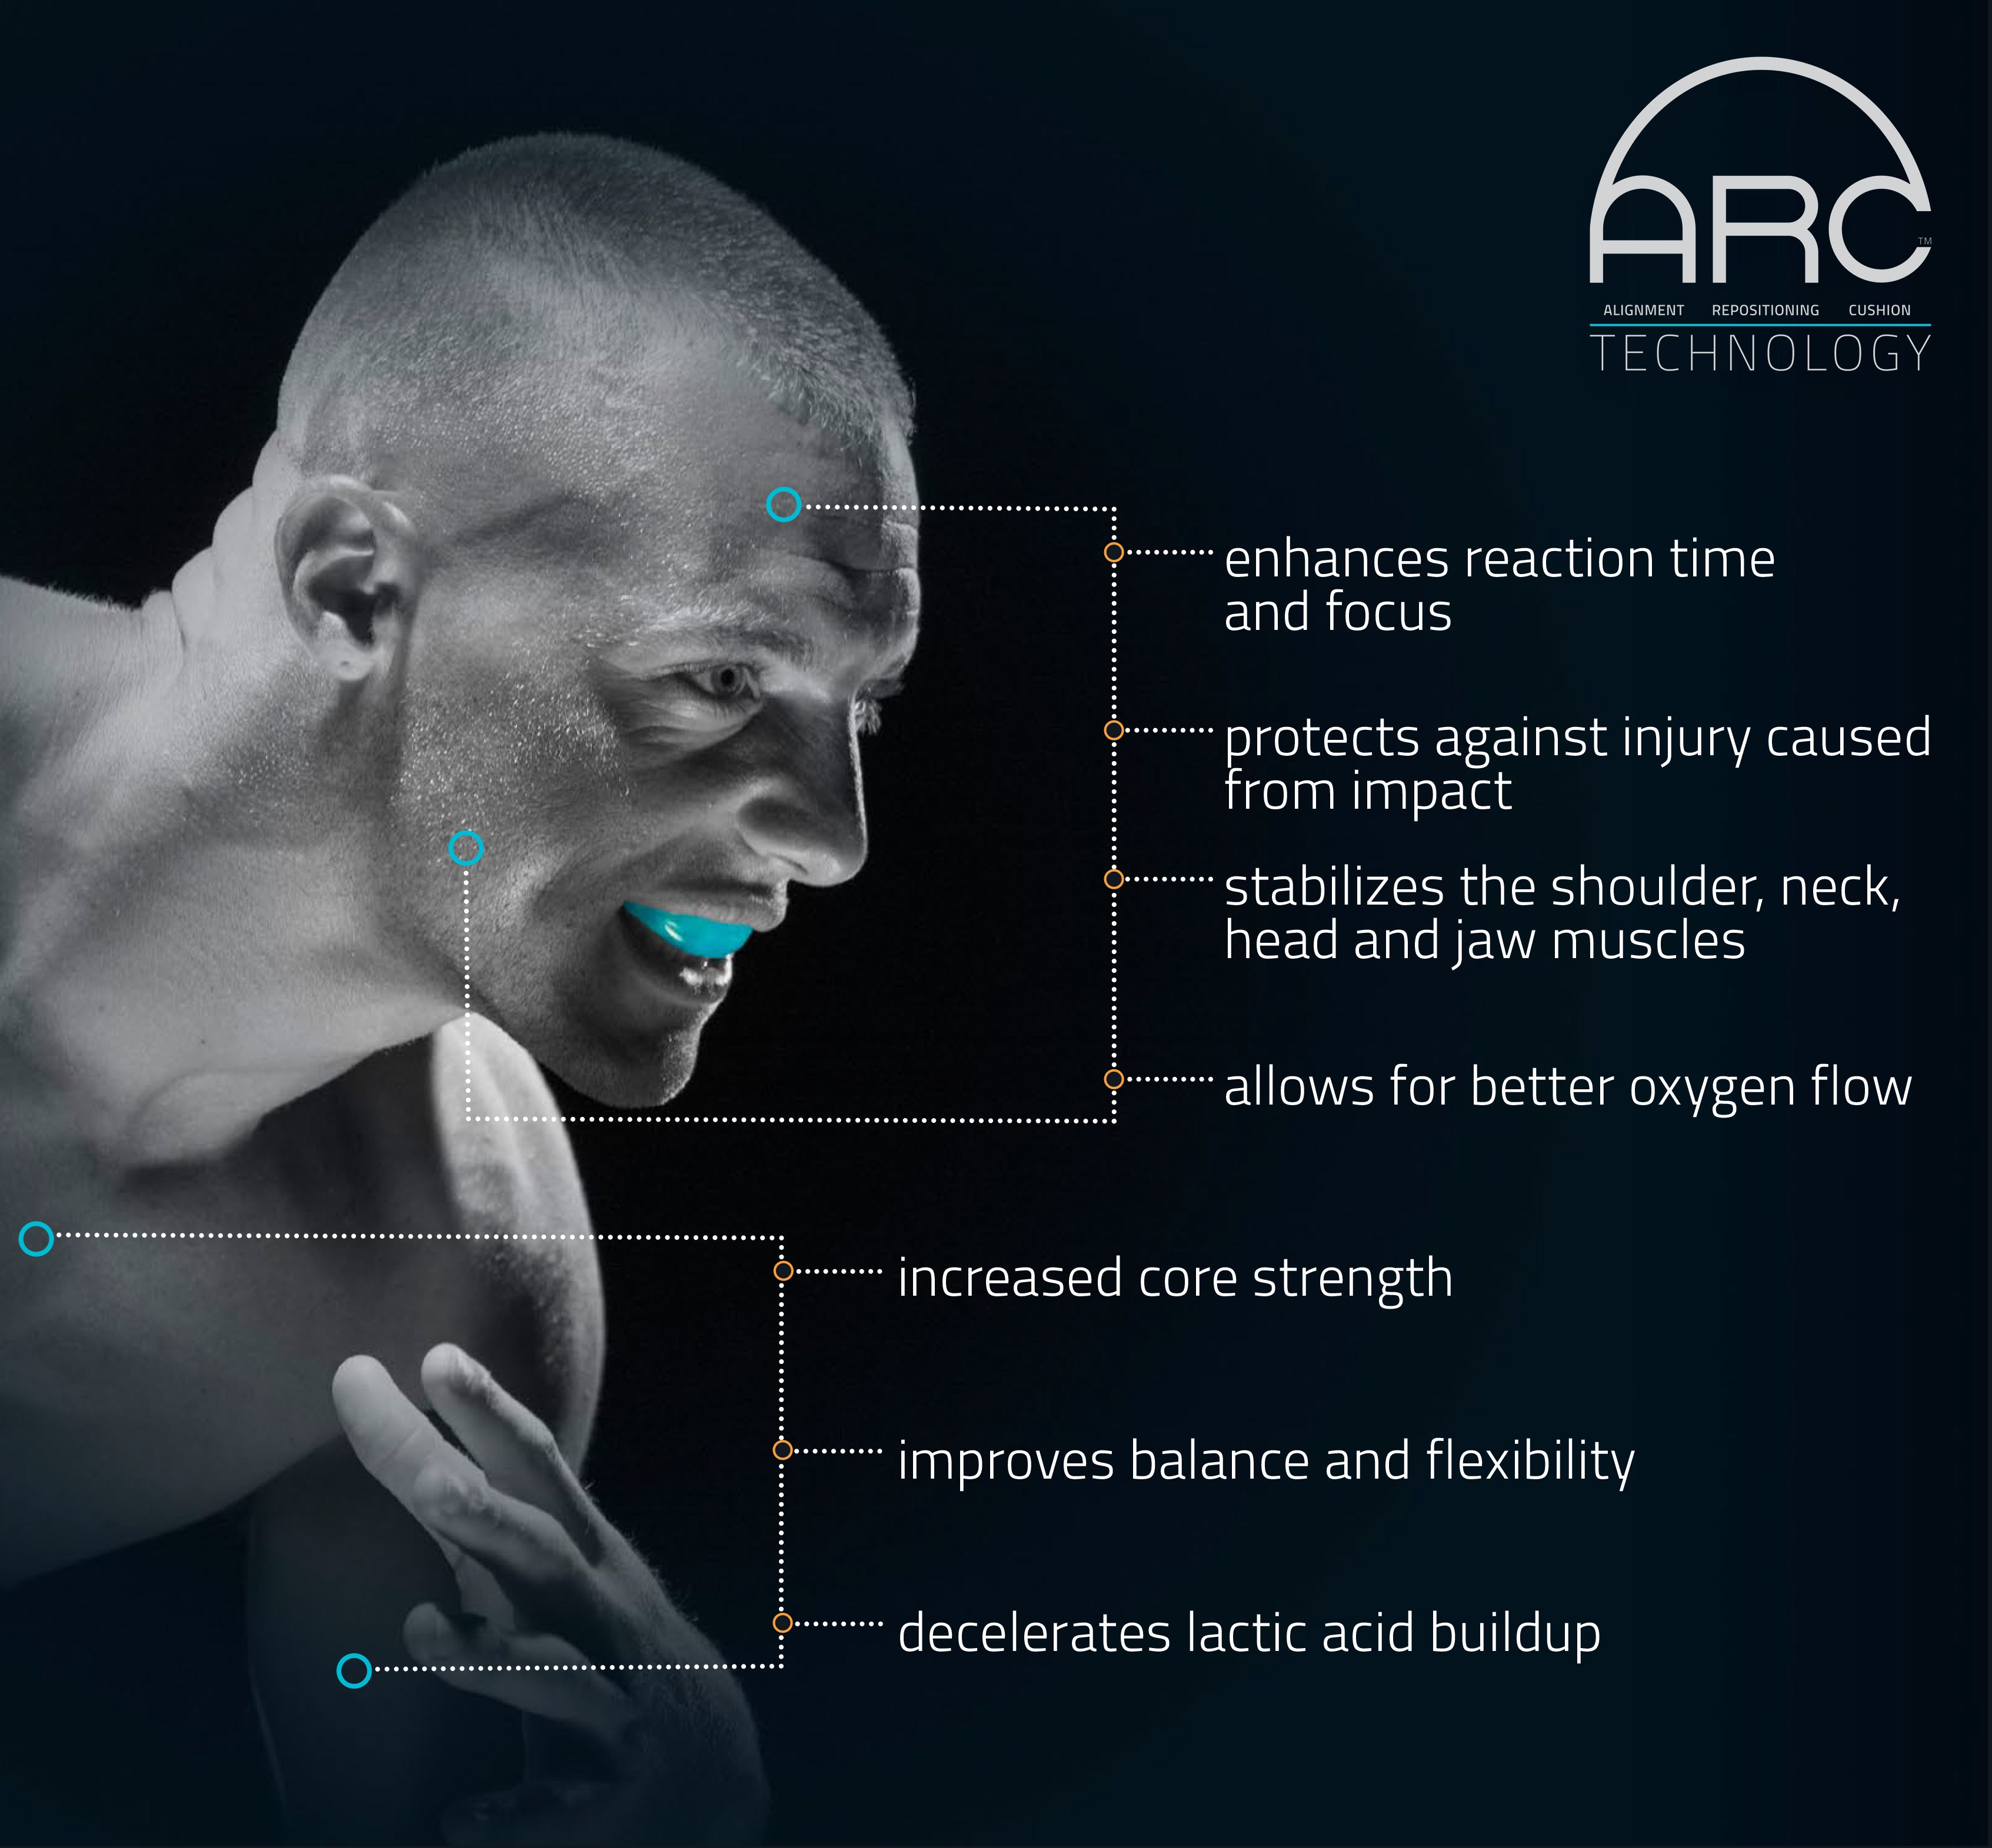 ARC TECHNOLOGY ENHANCES REACTION TIME AND FOCUS, PROTECTS AGAINST INJURY FROM IMPACT, STABILIZES THE SHOULDER, NECK, HEAD AND JAW MUSCLES, ALLOWS FOR BETTER OXYGEN, INCREASES CORE STRENGTH, BALANCE, FLEXIBILITY, DECELERATES LACTIC ACID BUILDUP